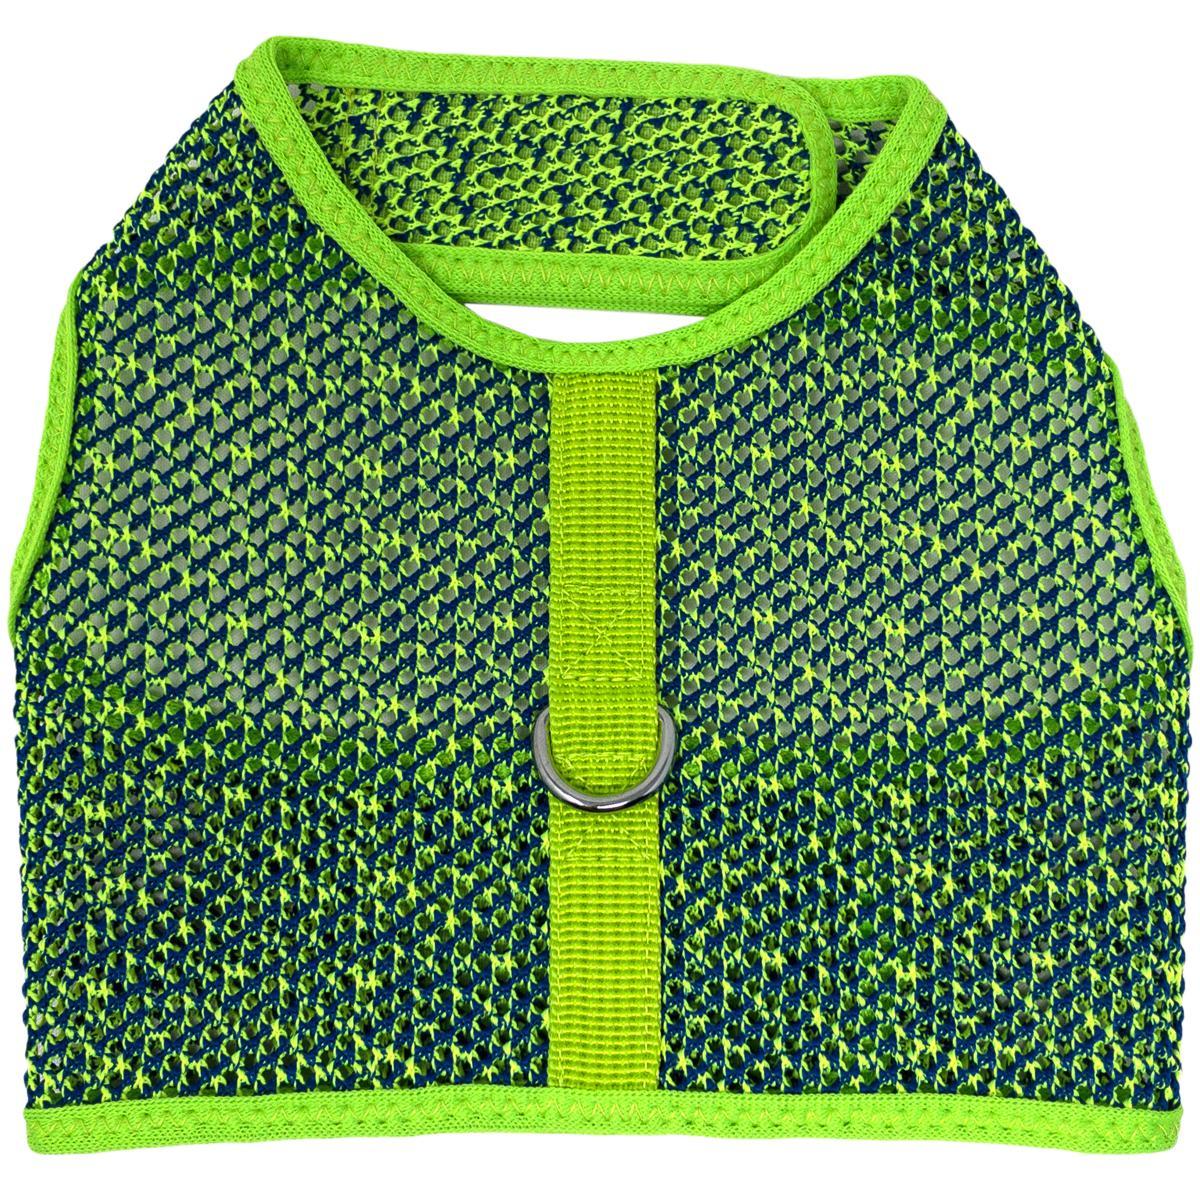 Doggie Design Active Mesh Dog Harness with Leash - Neon Green & Blue